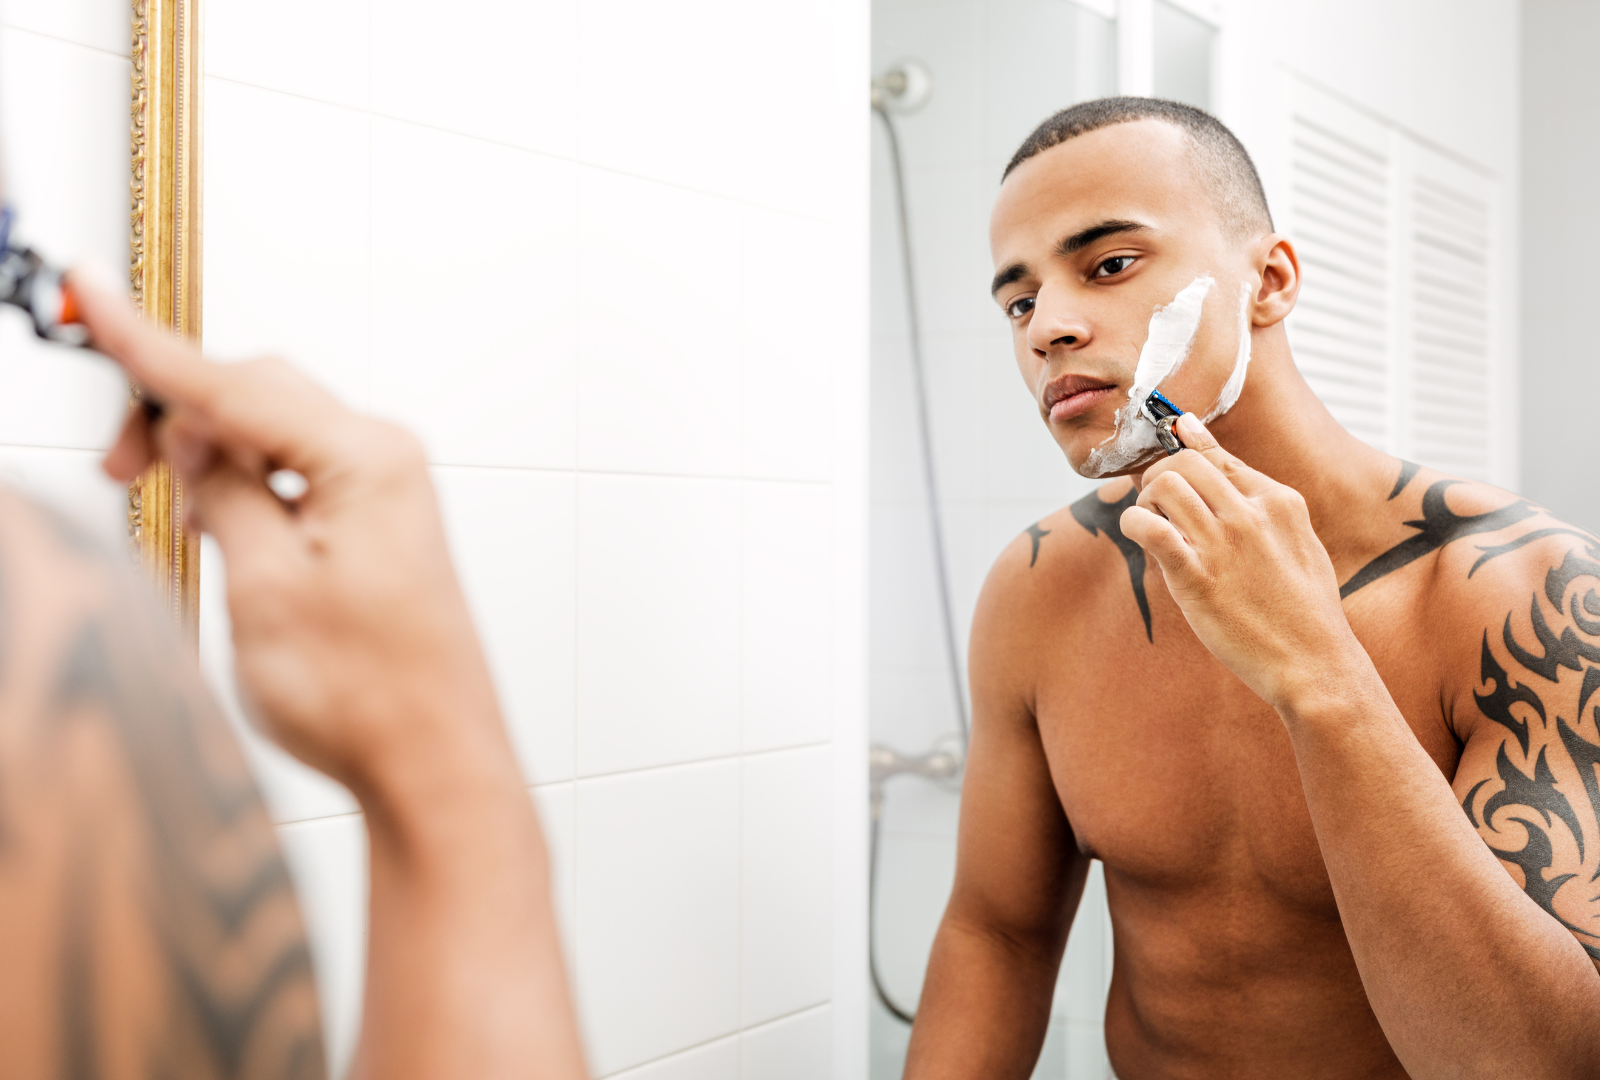 Elevate your style with the best barbering and grooming products!